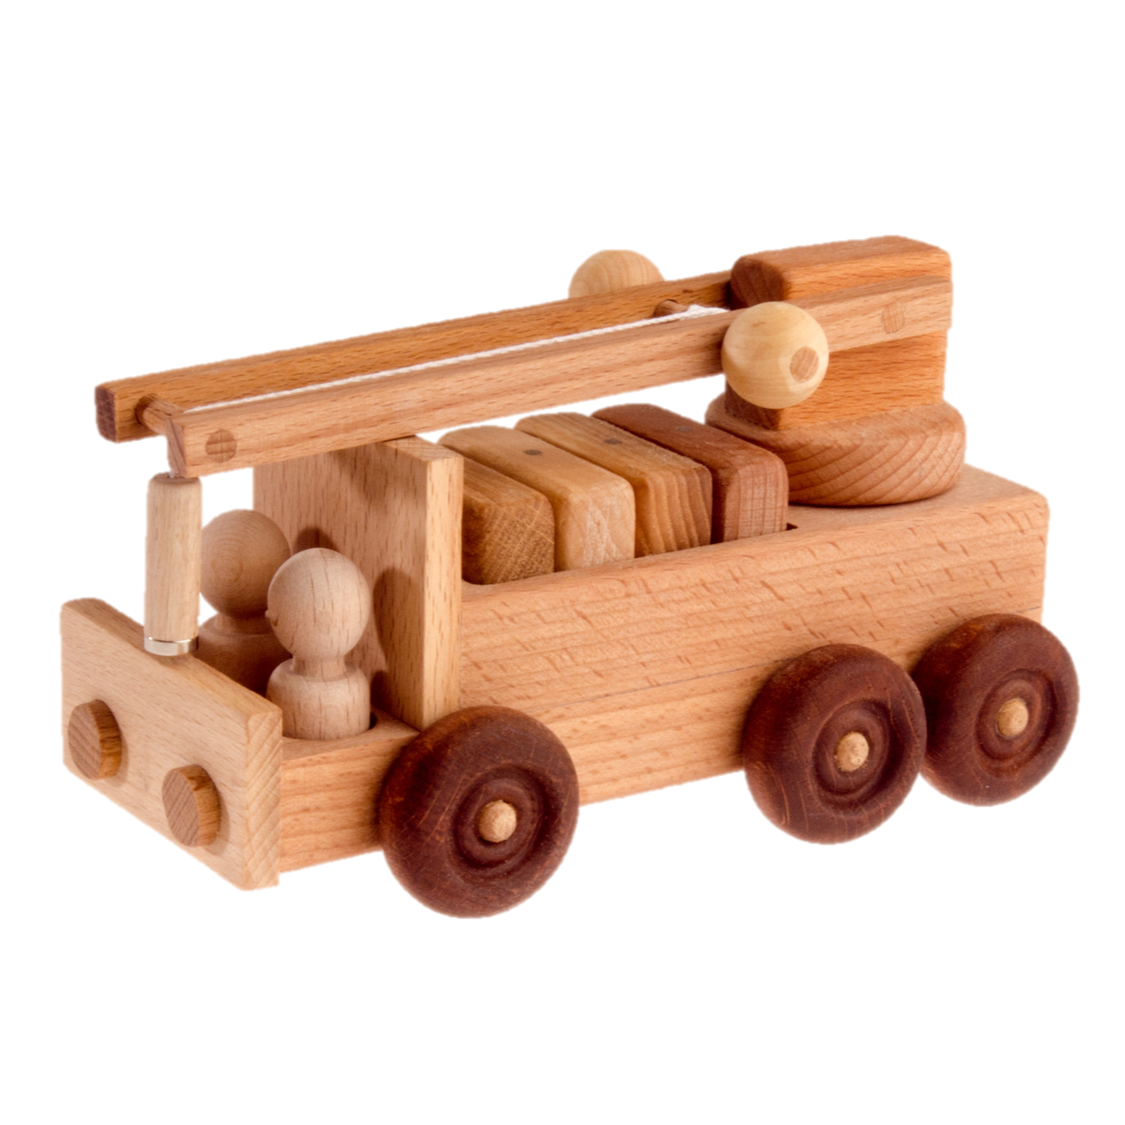 Vintage Wooden Children's Toy Crane and Truck, Set of 2 for sale at Pamono